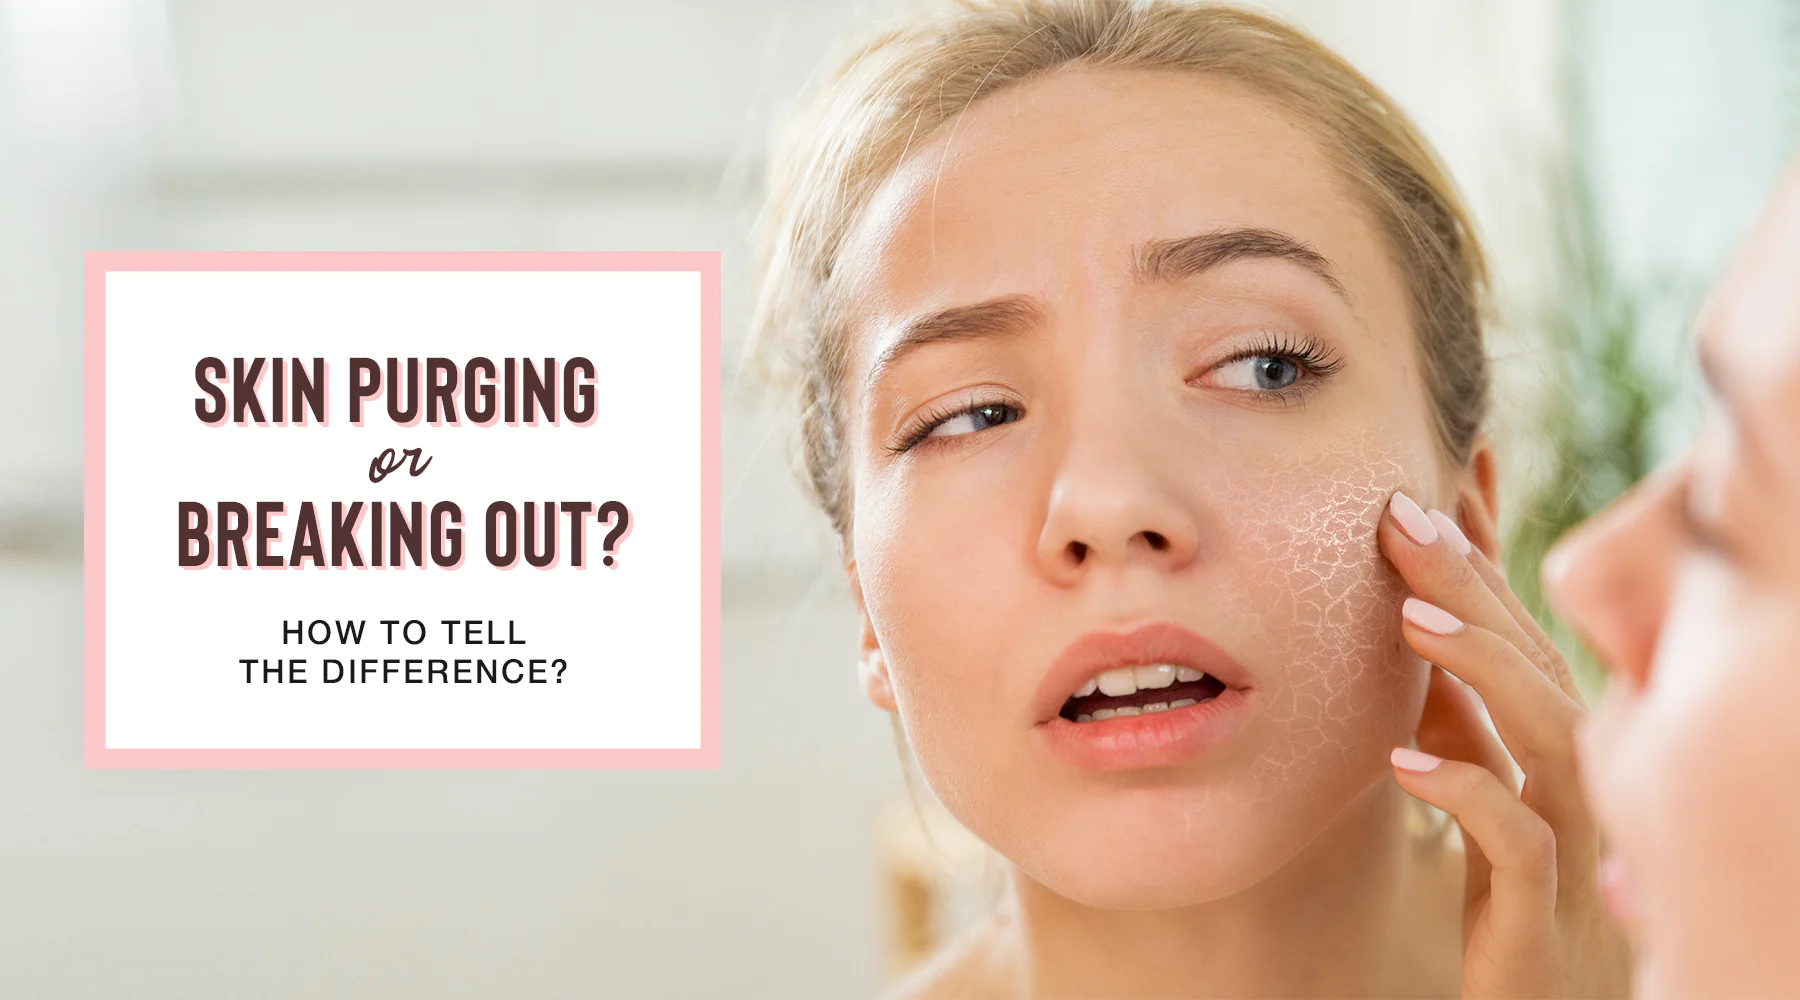 Skin Purging: What You Need to Know